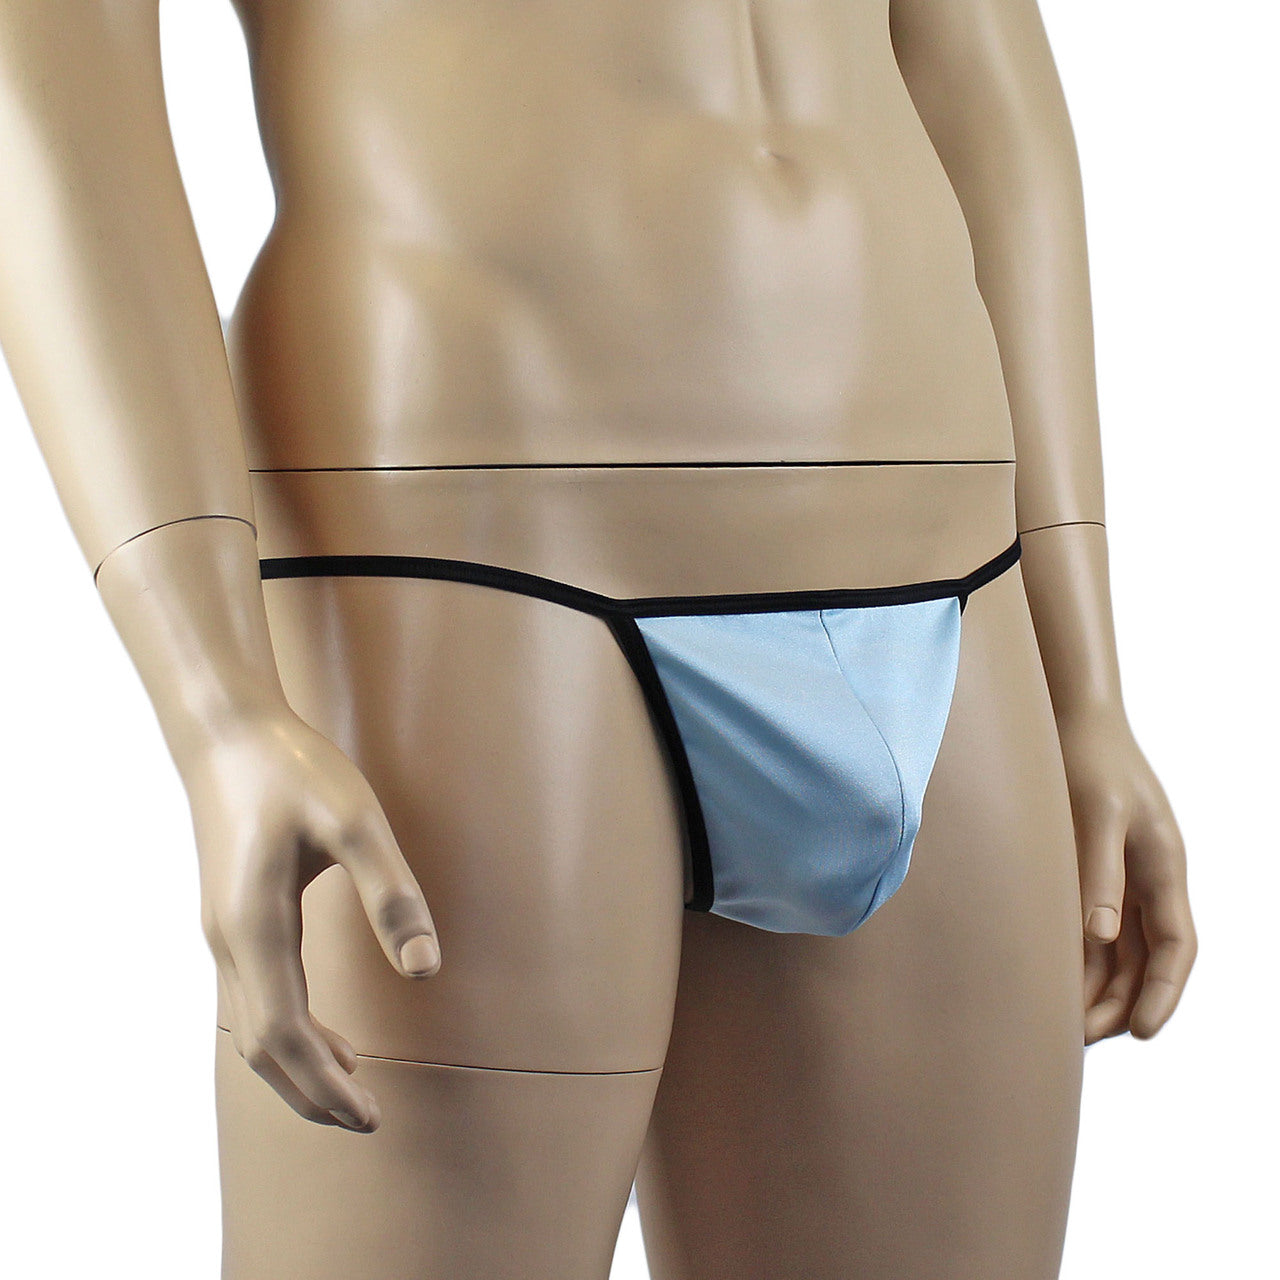 Mens Twinkle Lingerie Pouch G string with Triangle Back & Bow Light Blue